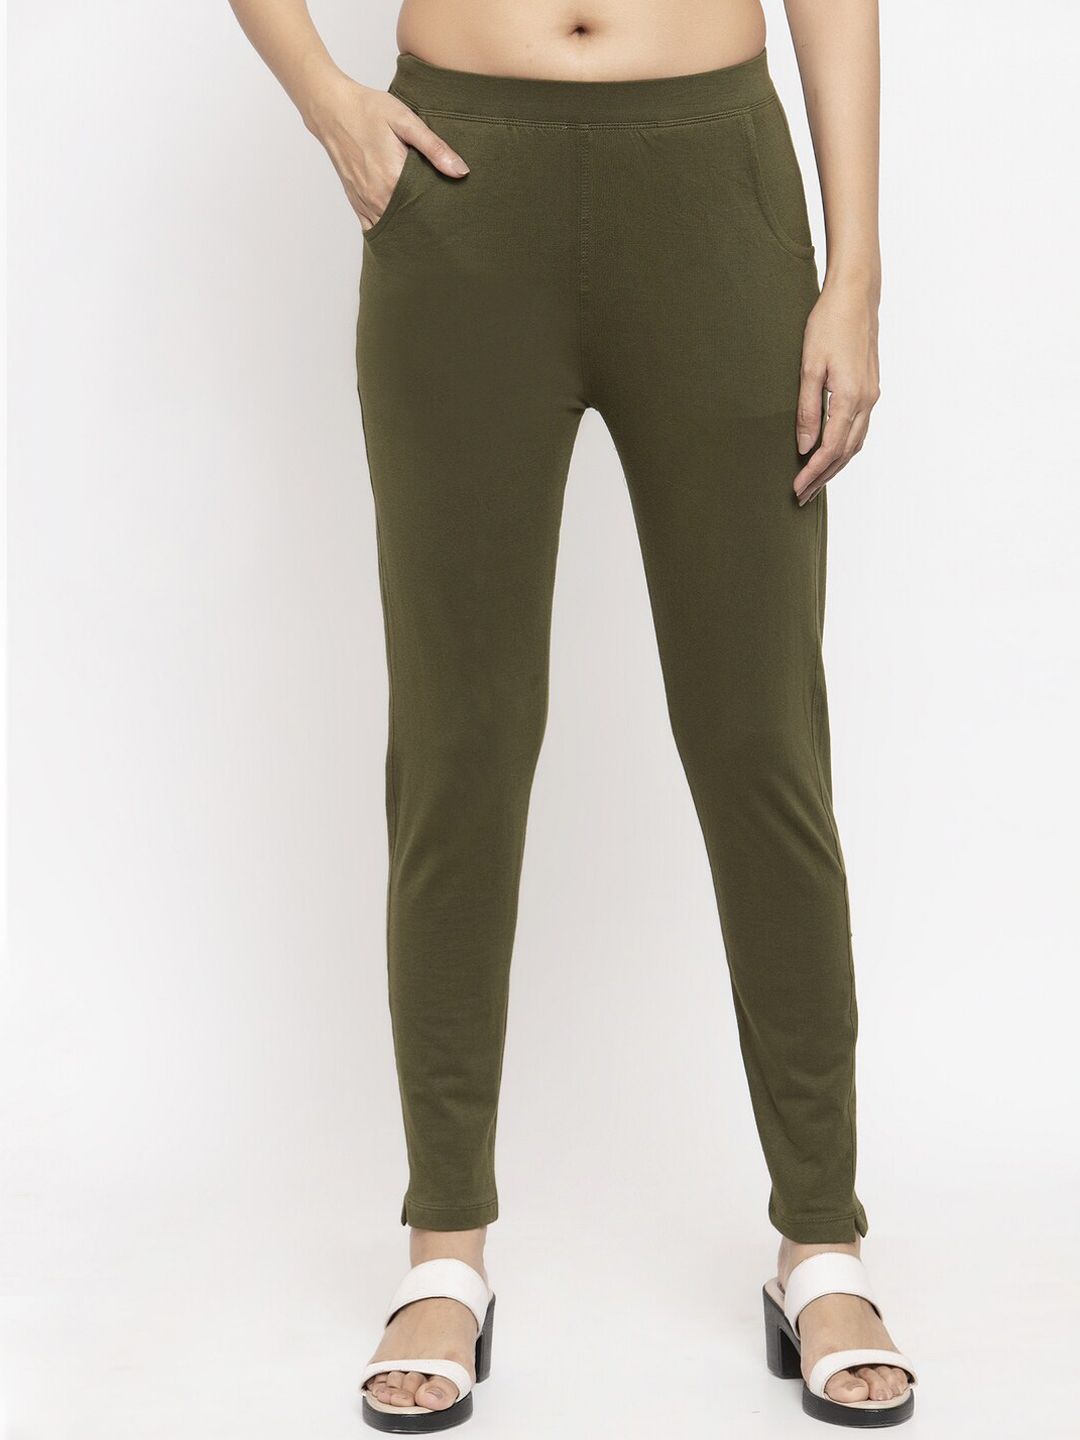 NEUDIS Women Olive-Green Solid Ankle Length Slim Fit Leggings Price in India